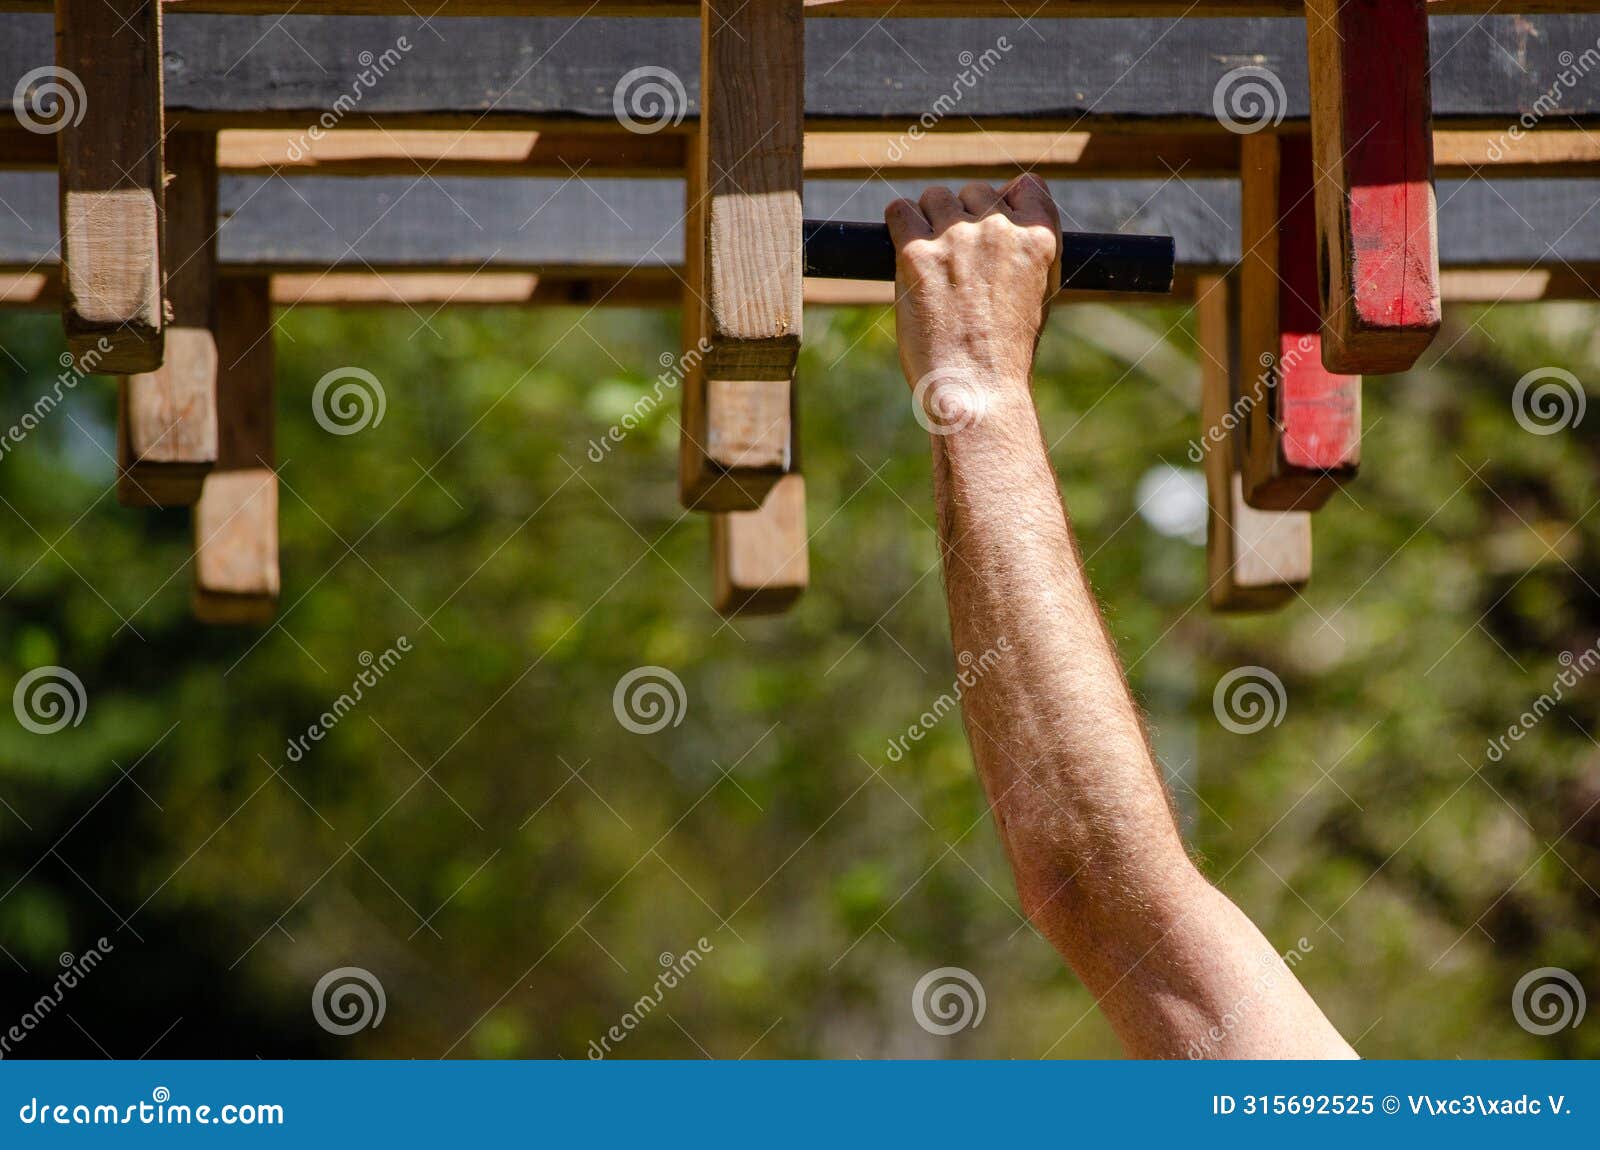 athlete hand at a hanging obstacle at an obstacle course race, ocr